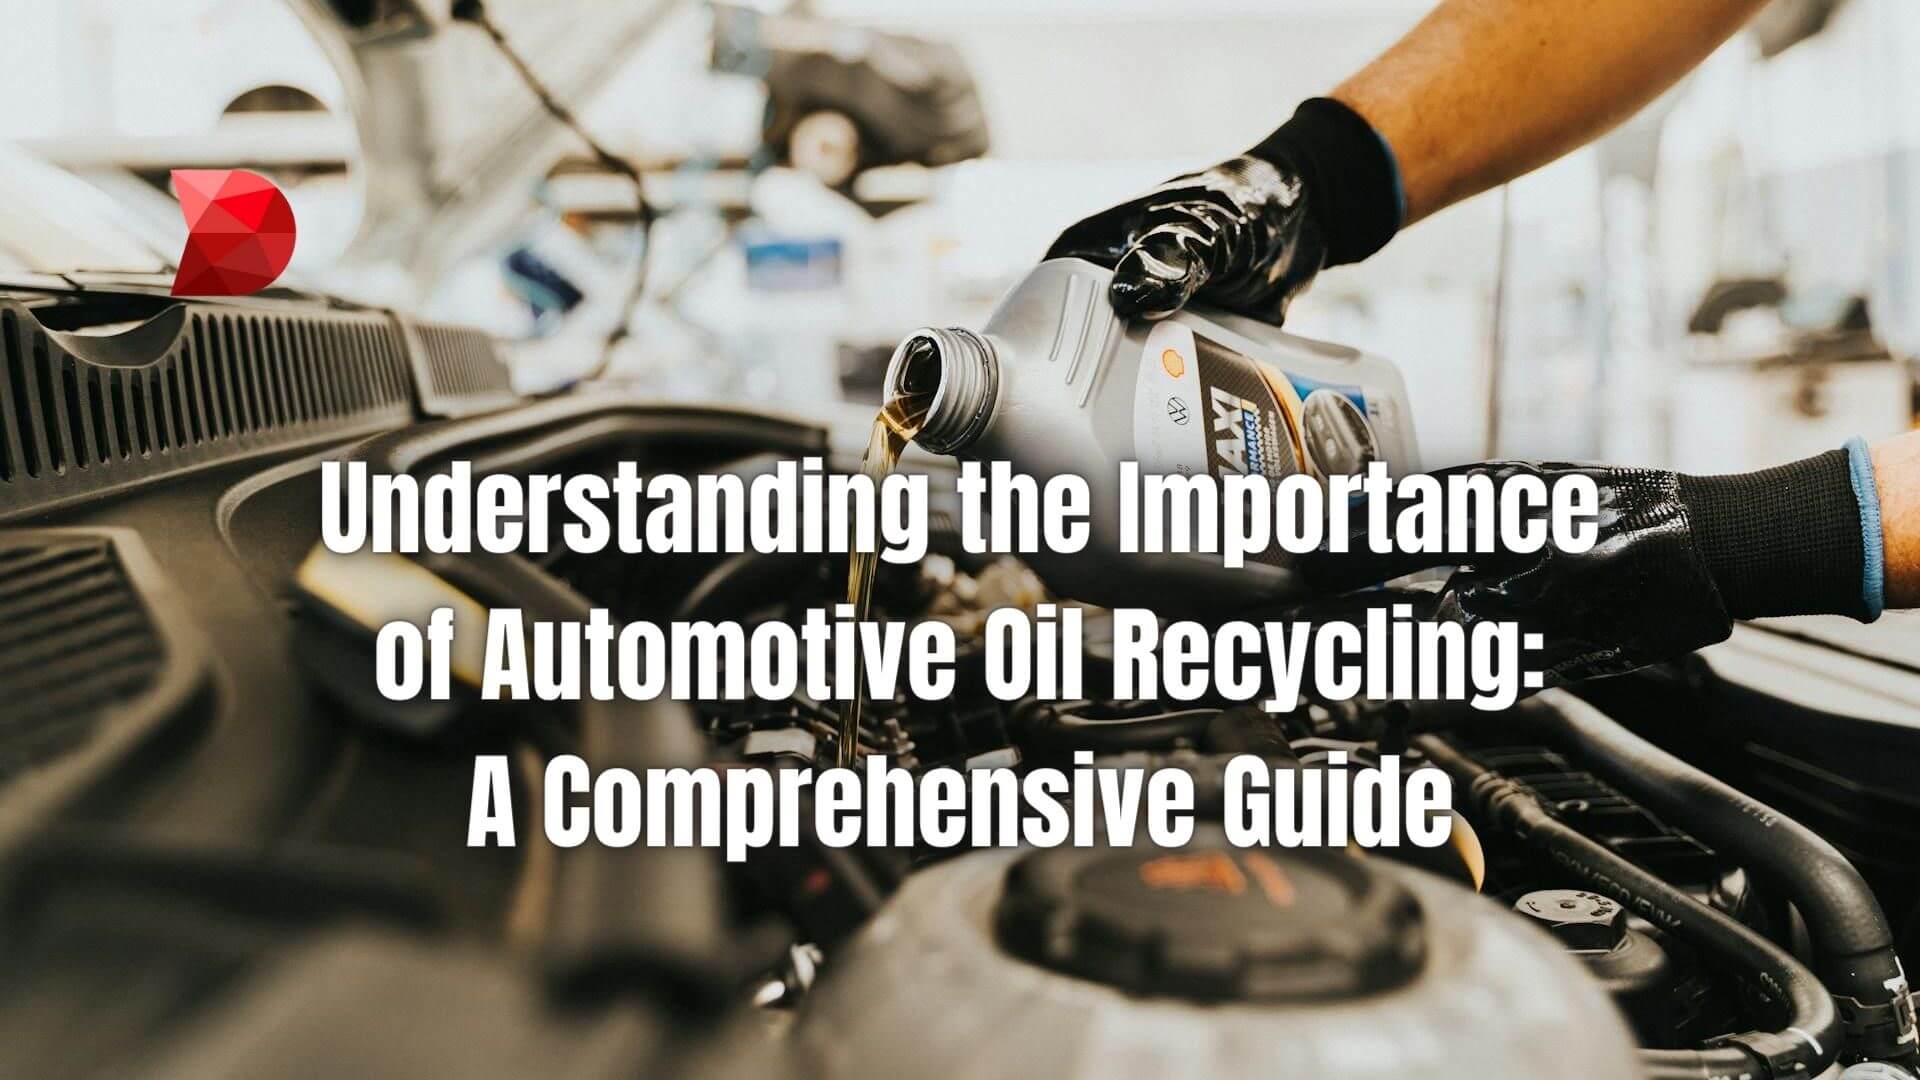 Unravel the significance of automotive oil recycling with our full guide. Explore eco-friendly practices and their impact on sustainability.